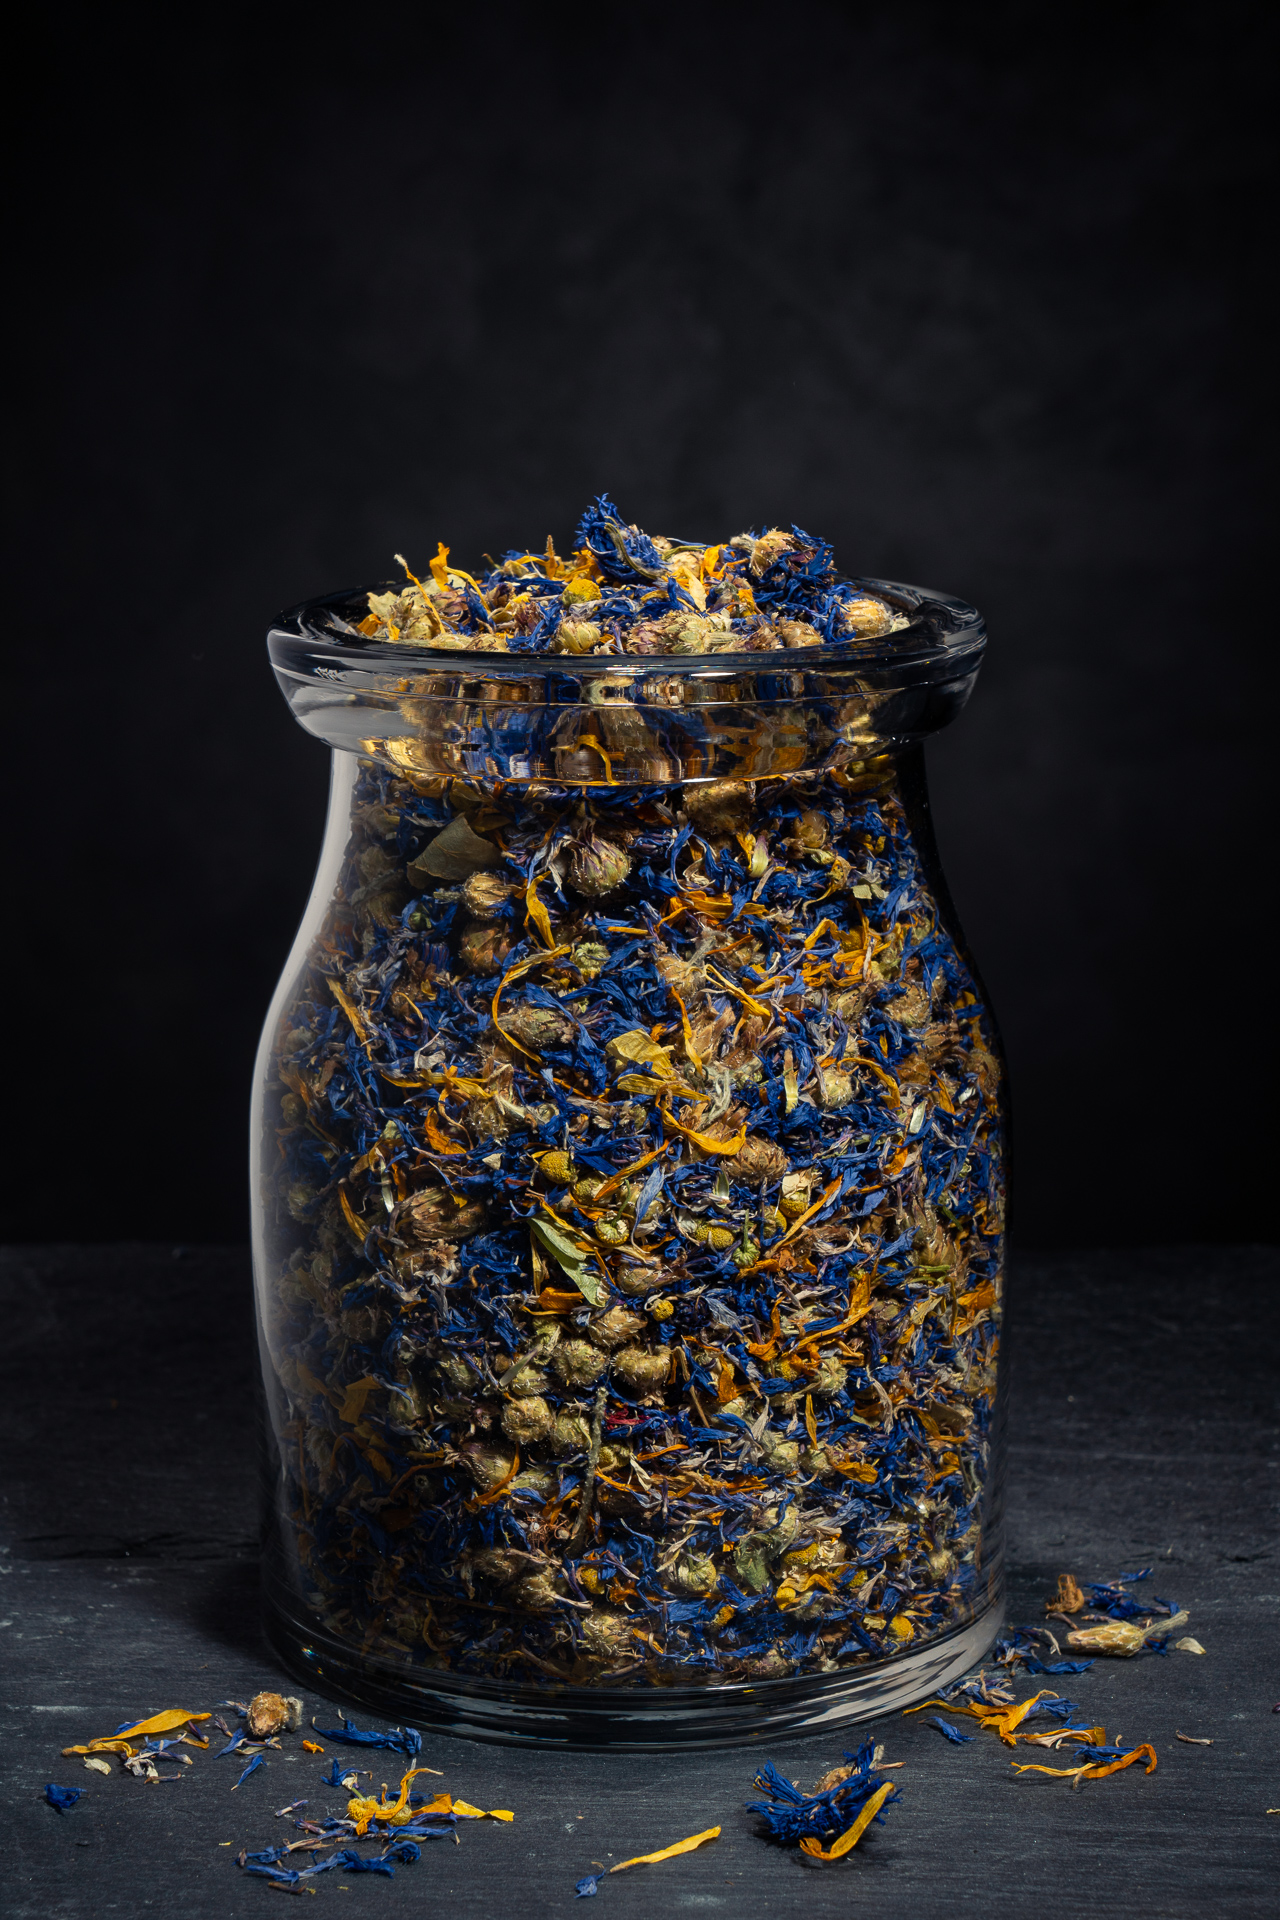 Jar with a mixture of dried flowers (lavender, jasmine) - additive to horse feed